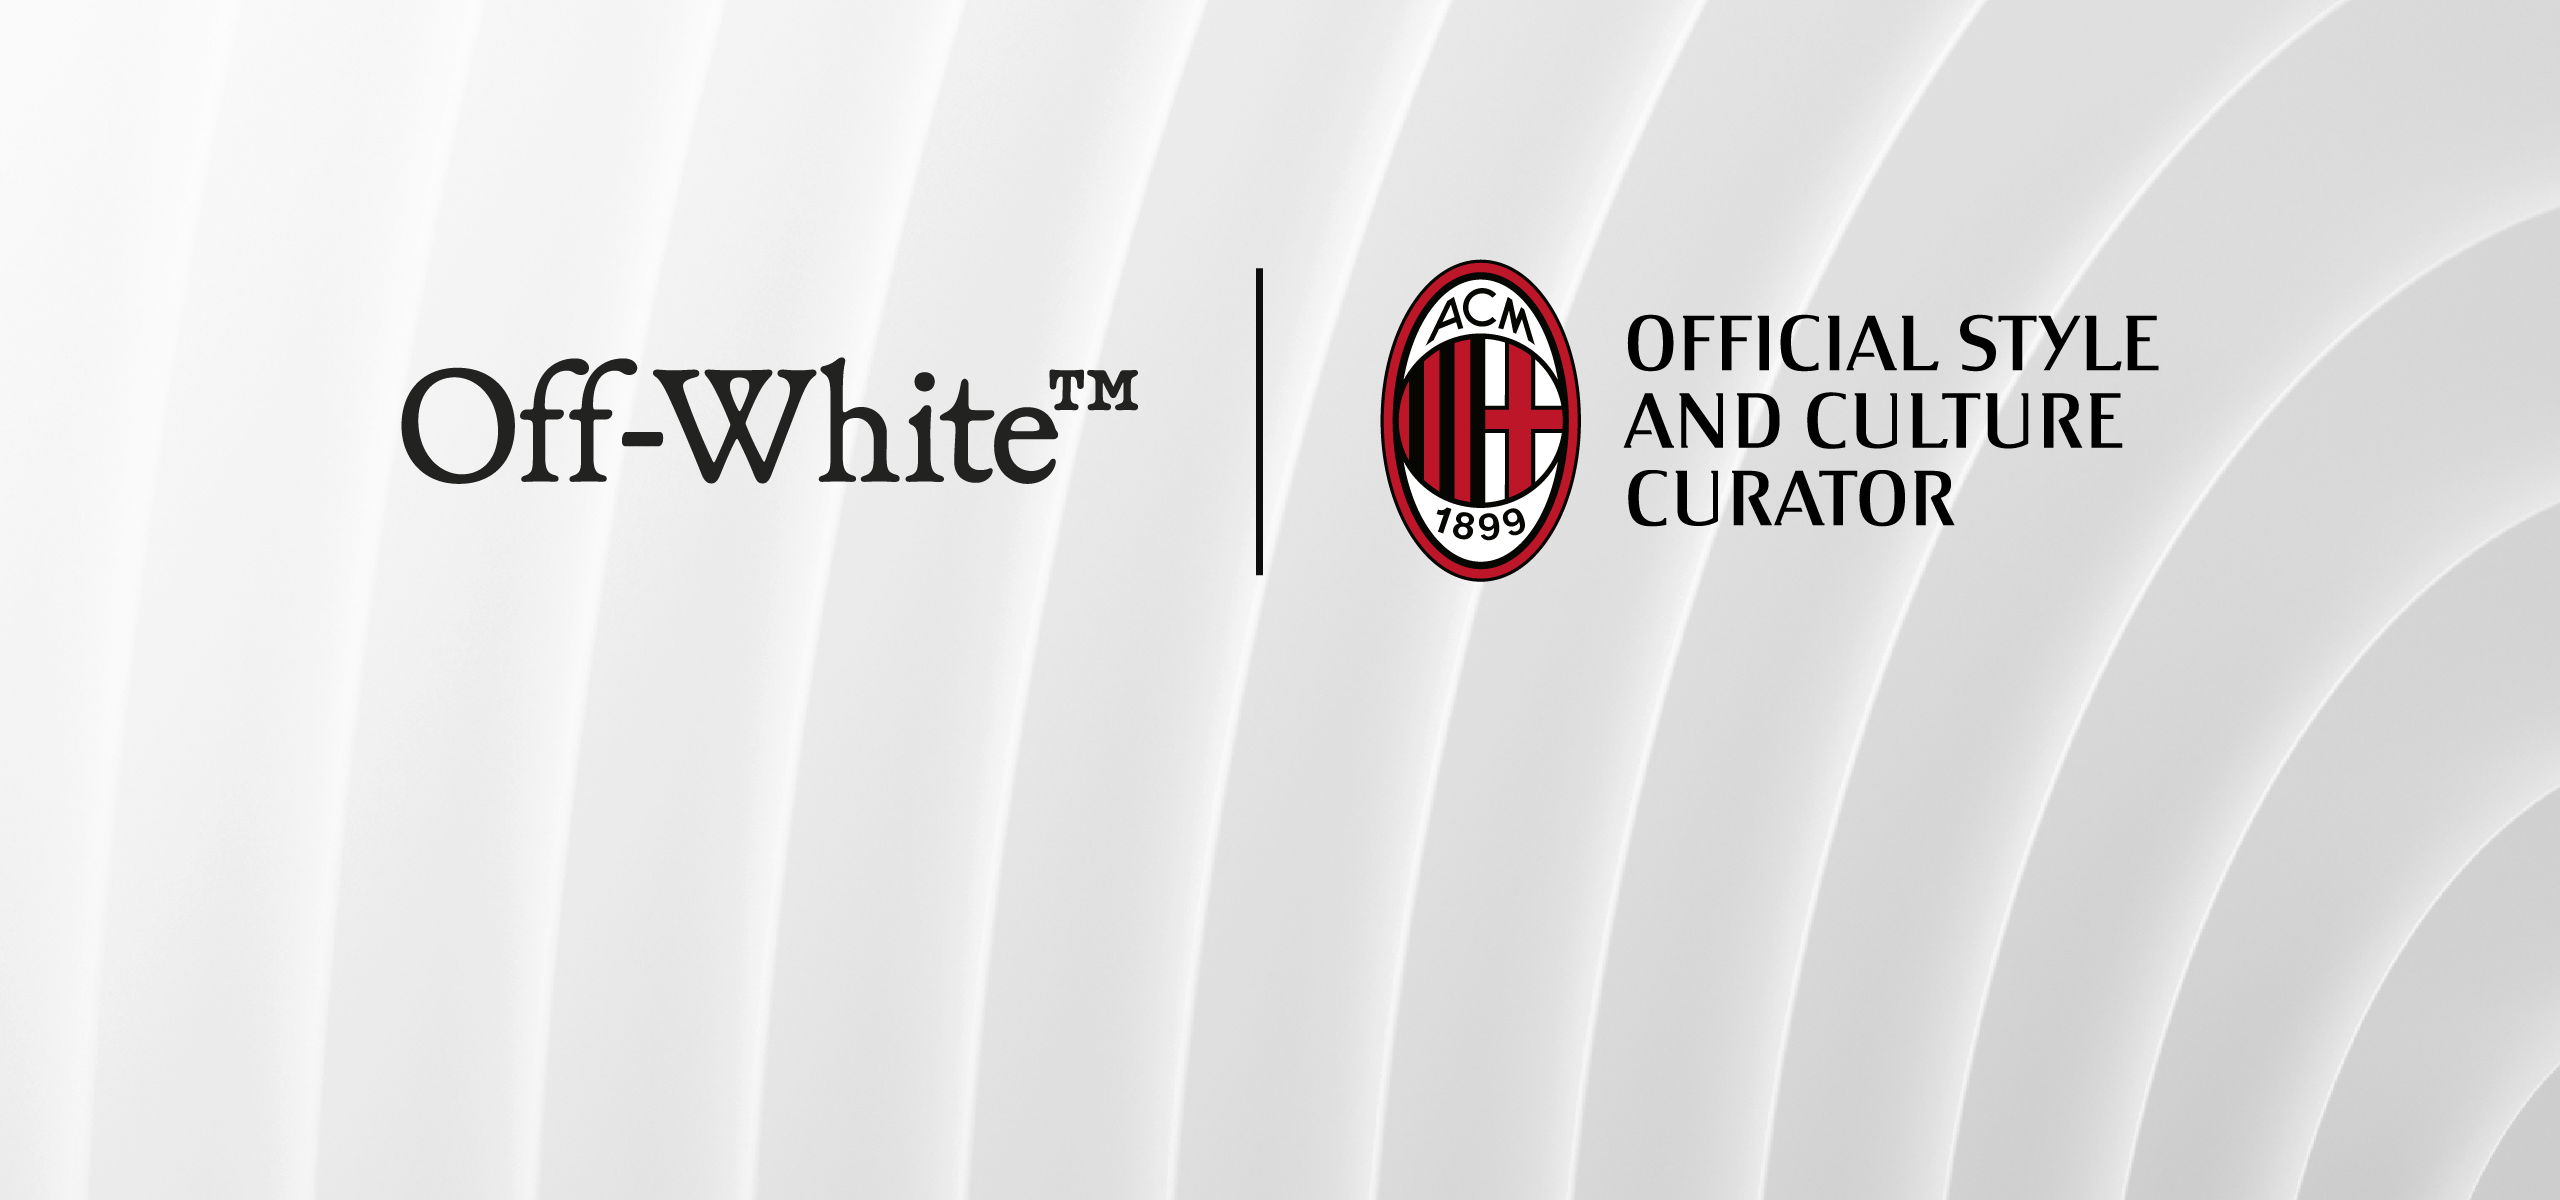 Outlander Magazine on X: Off-White has partnered with AC Milan as their  official Style and Culture Curator! (2022)  / X